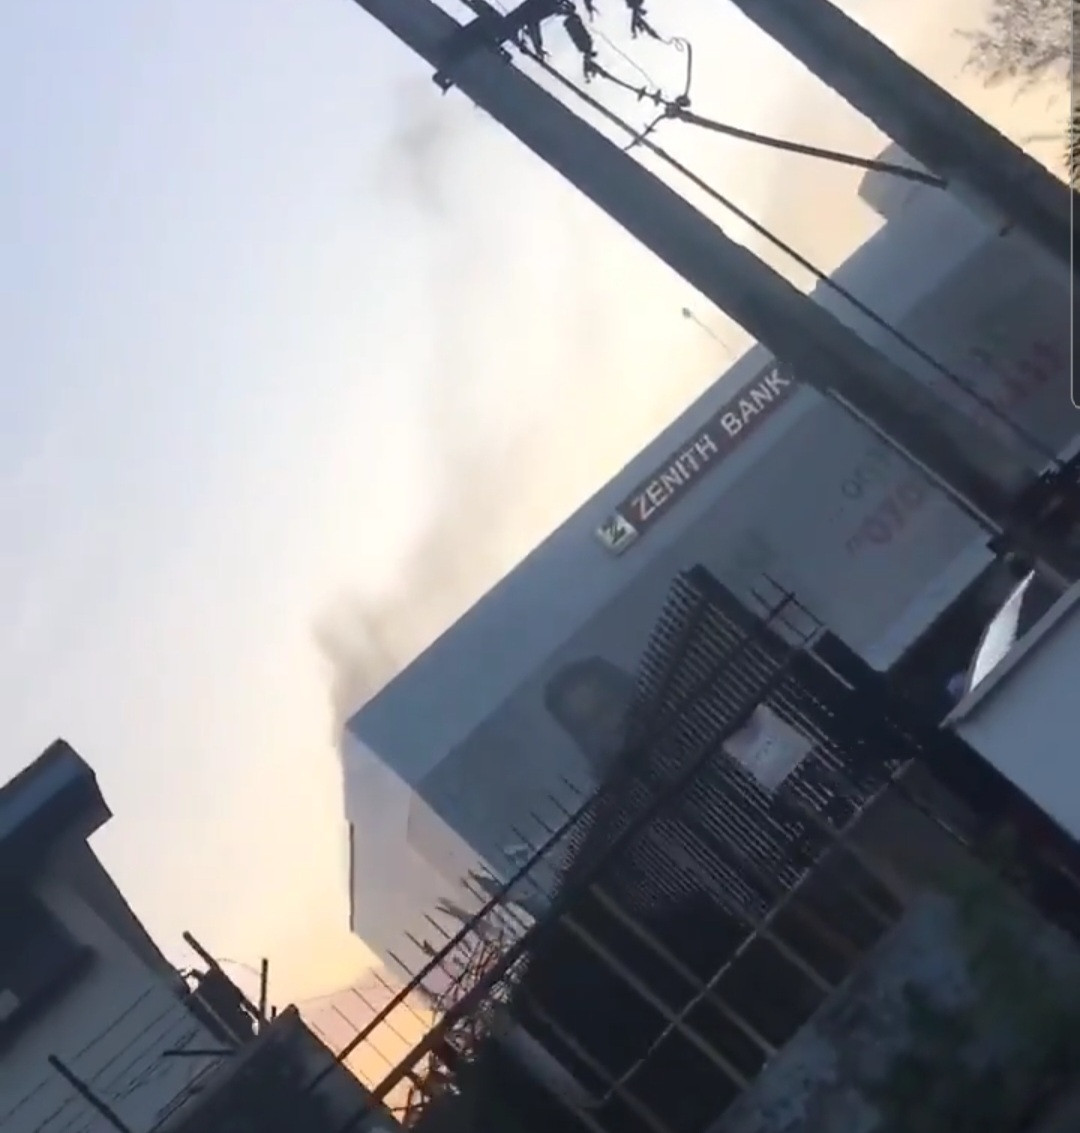 Fire breaks out at Zenith bank on Oba Akran Road, Ikeja  (video)